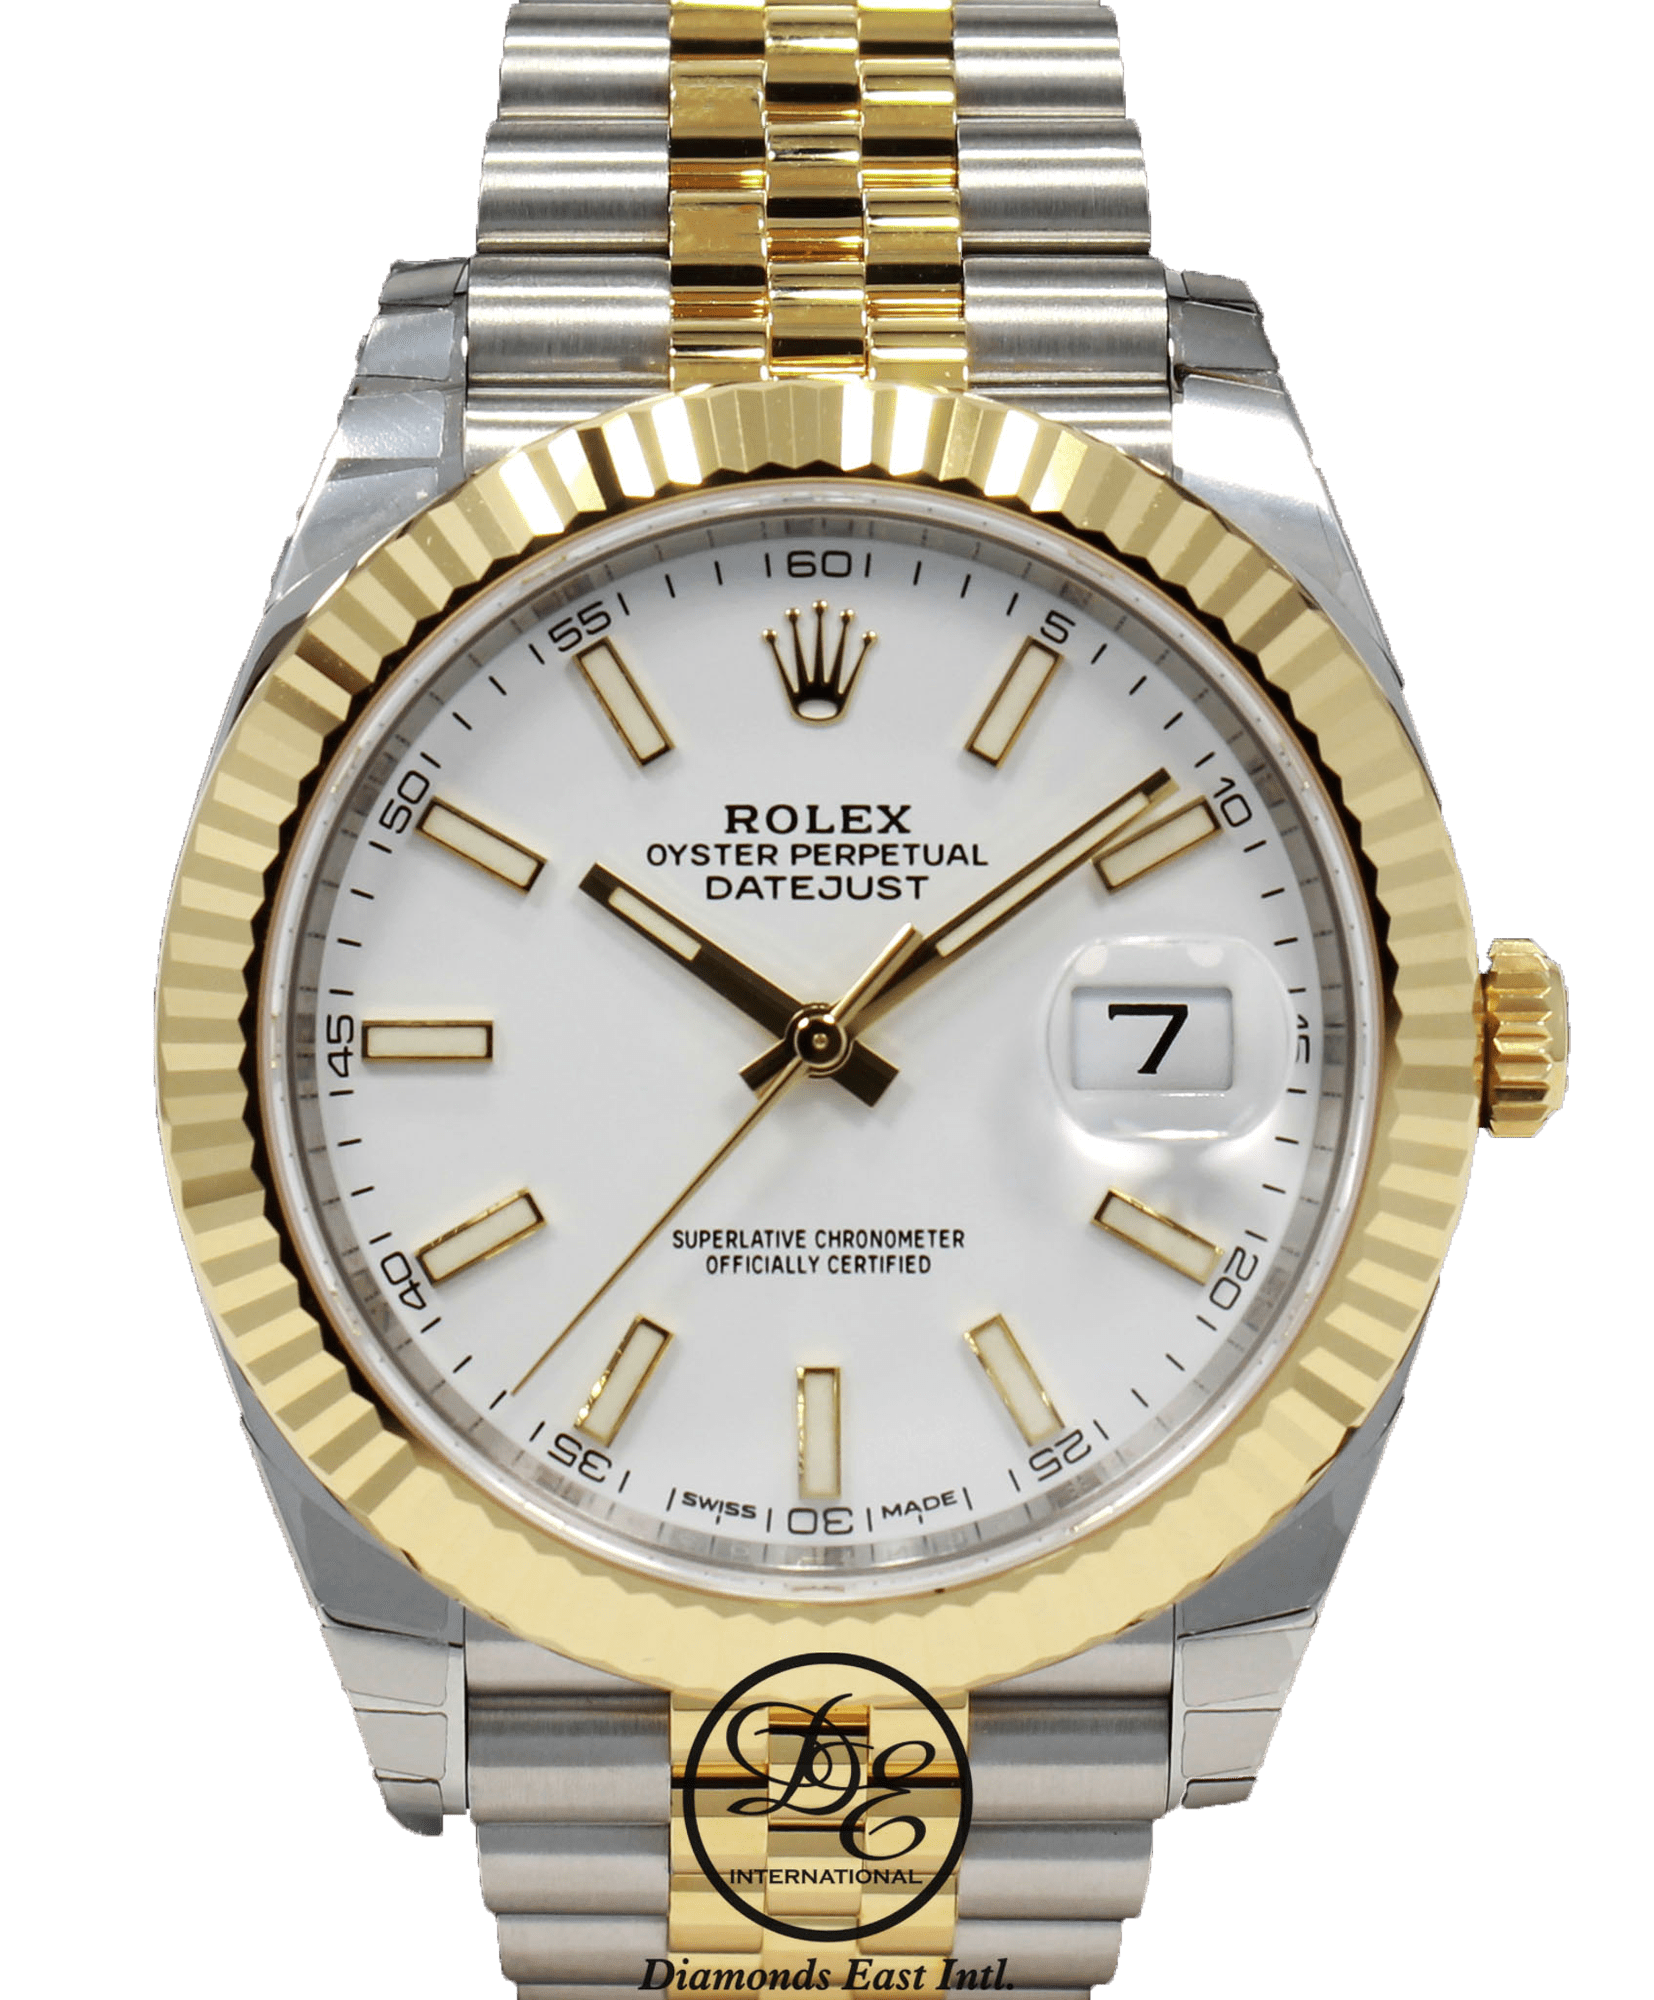 Rolex Datejust 41mm 126333 Stainless Steel & Yellow Gold Watch